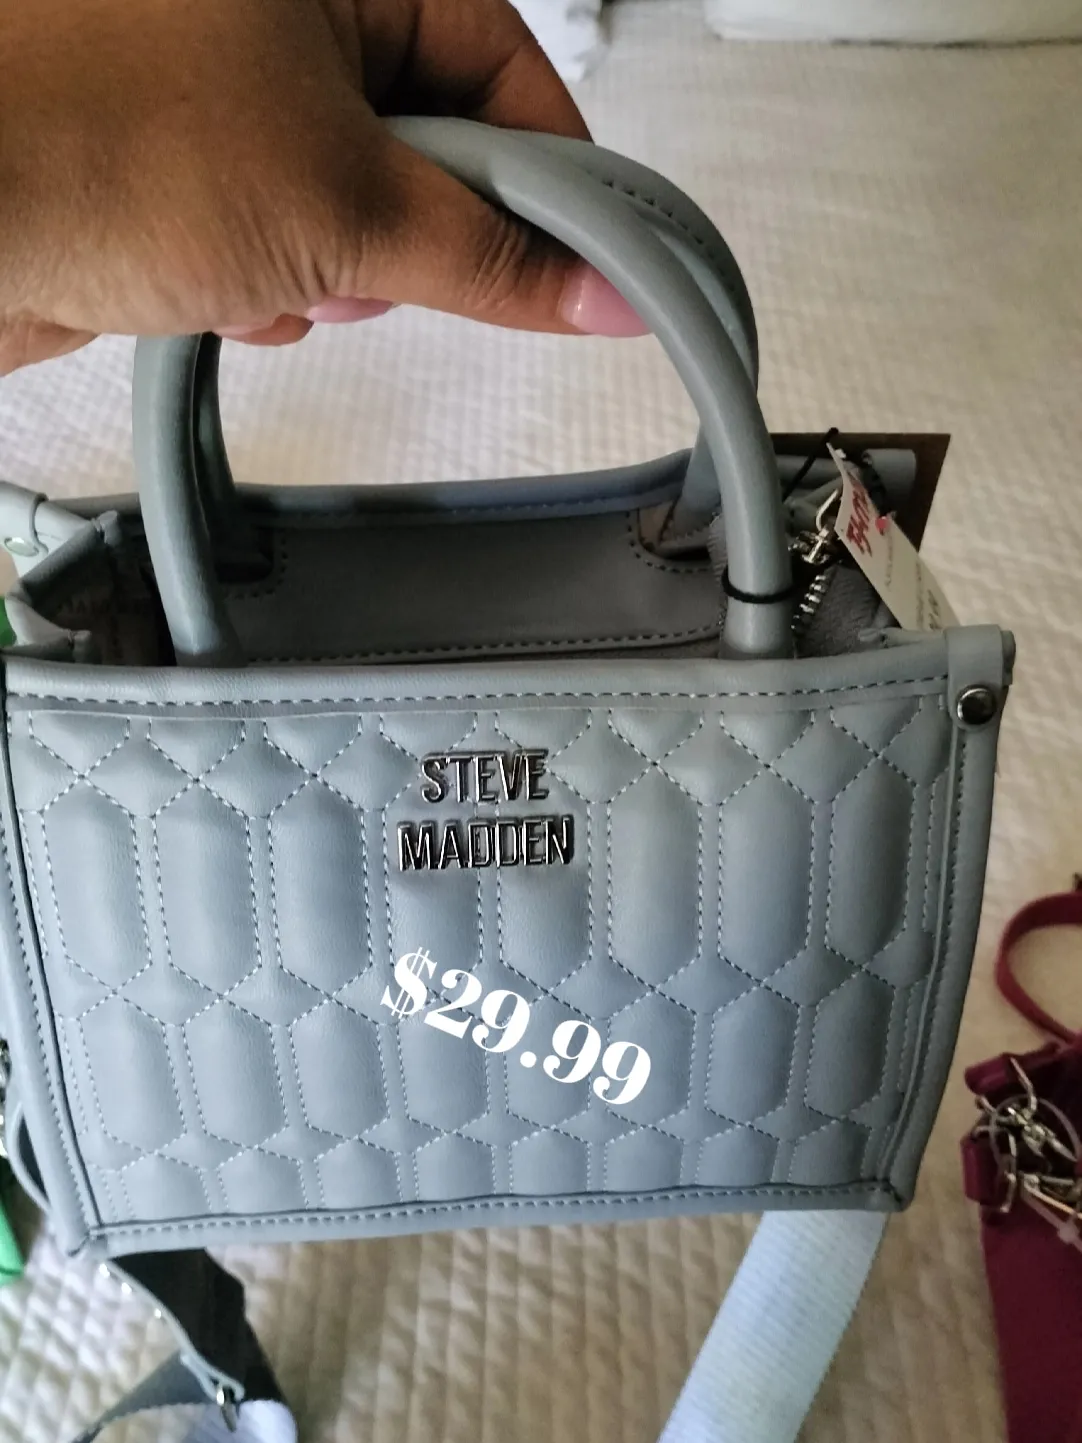 I found the tjmaxx steve madden set yall have been posting